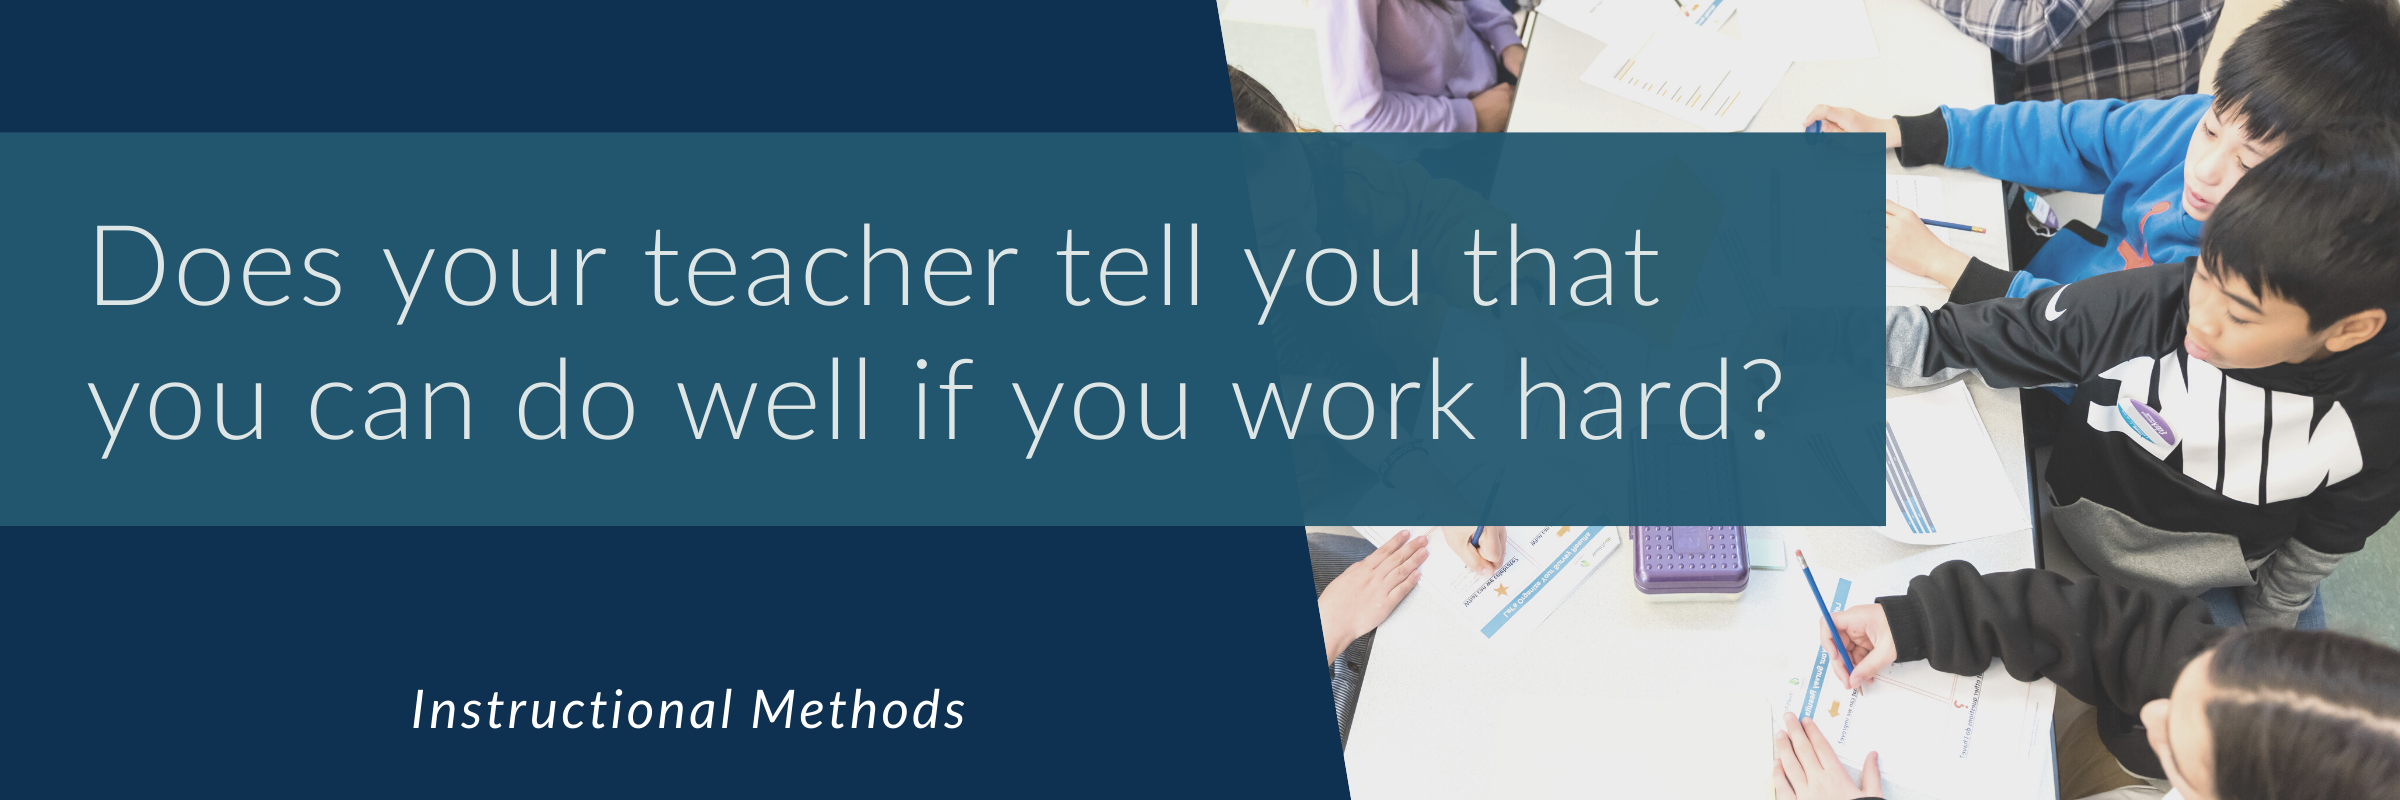 Does your teacher tell you that you can do well if you work hard?